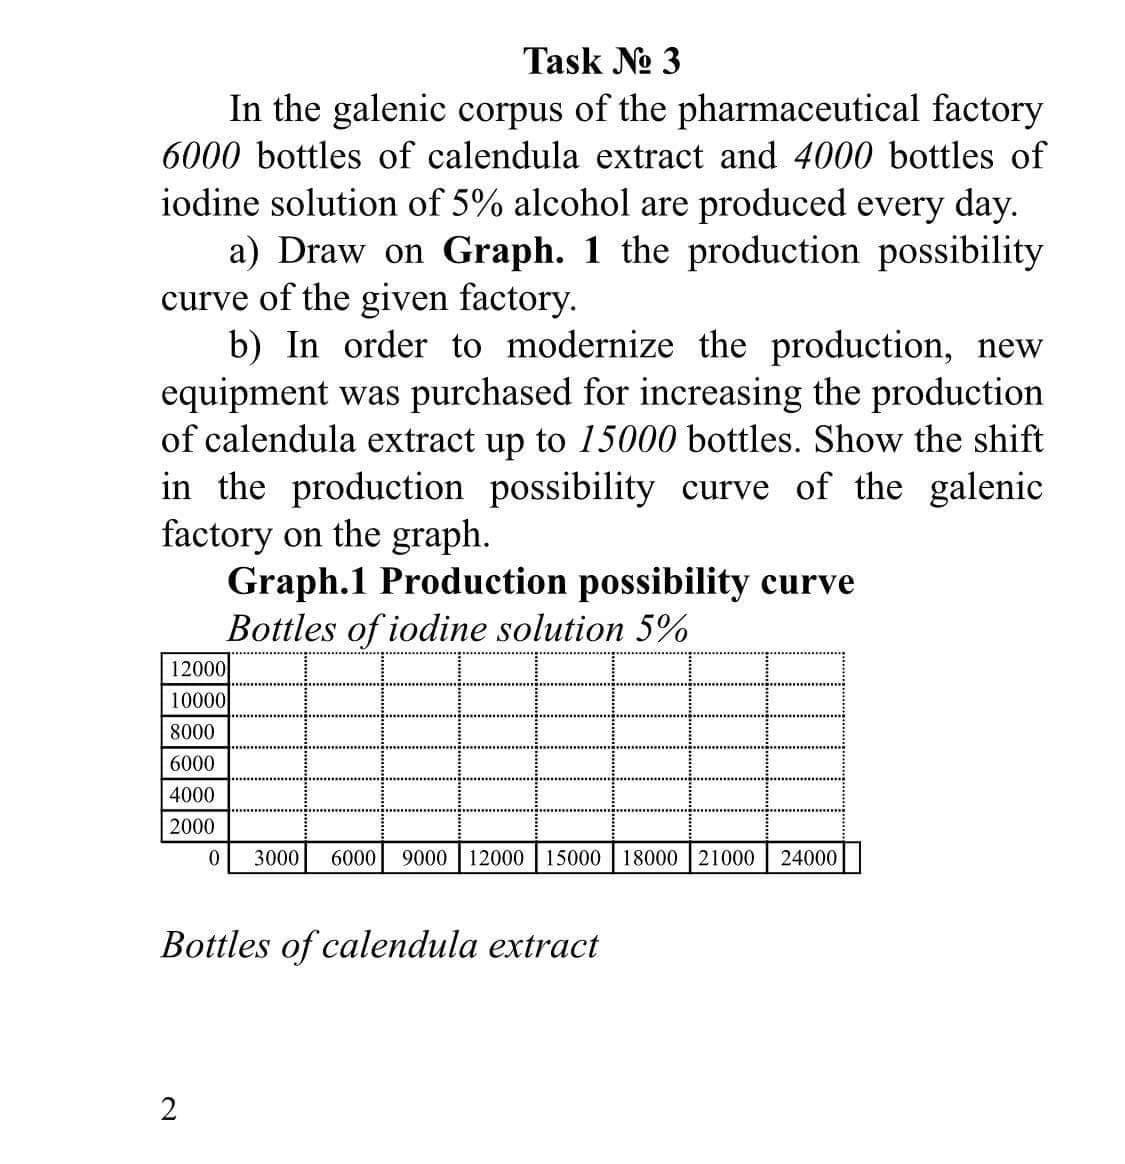 Task No 3
In the galenic corpus of the pharmaceutical factory
6000 bottles of calendula extract and 4000 bottles of
iodine solution of 5% alcohol are produced every day.
a) Draw on Graph. 1 the production possibility
curve of the given factory.
b) In order to modernize the production, new
equipment was purchased for increasing the production
of calendula extract up to 15000 bottles. Show the shift
in the production possibility curve of the galenic
factory on the graph.
Graph.1 Production possibility curve
Bottles of iodine solution 5%
12000
10000
8000
6000
4000
2000
3000
6000
9000
12000 | 15000
18000 21000
24000
Bottles of calendula extract
